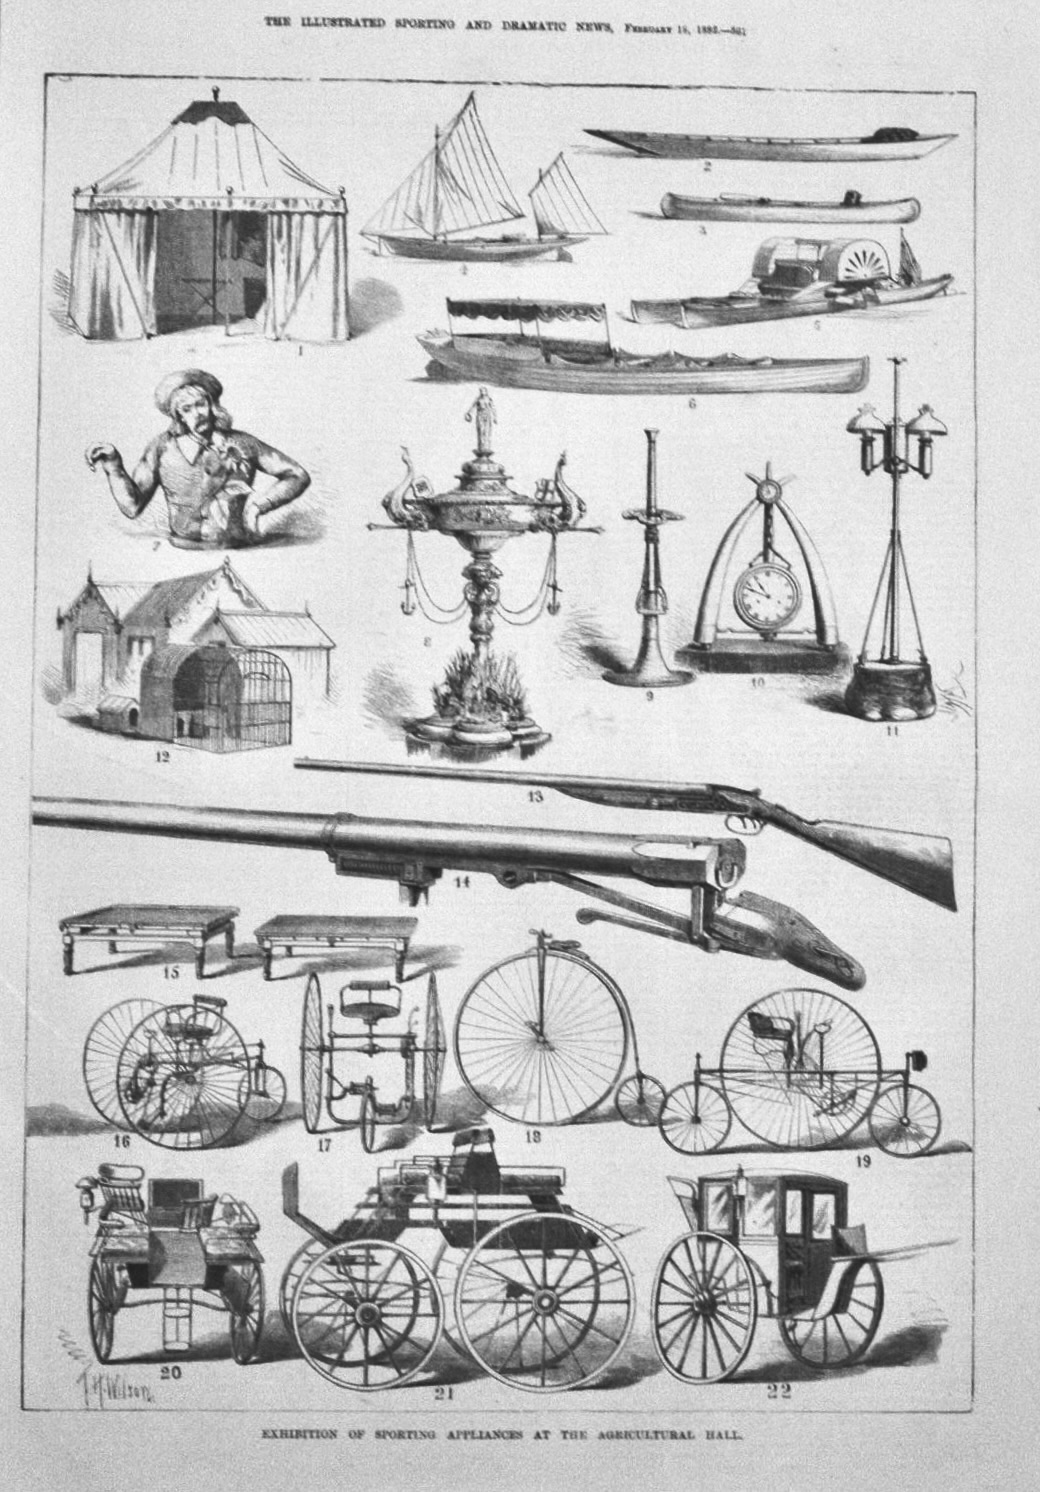 Exhibition of Sporting Appliances at the Agricultural Hall.  1882.